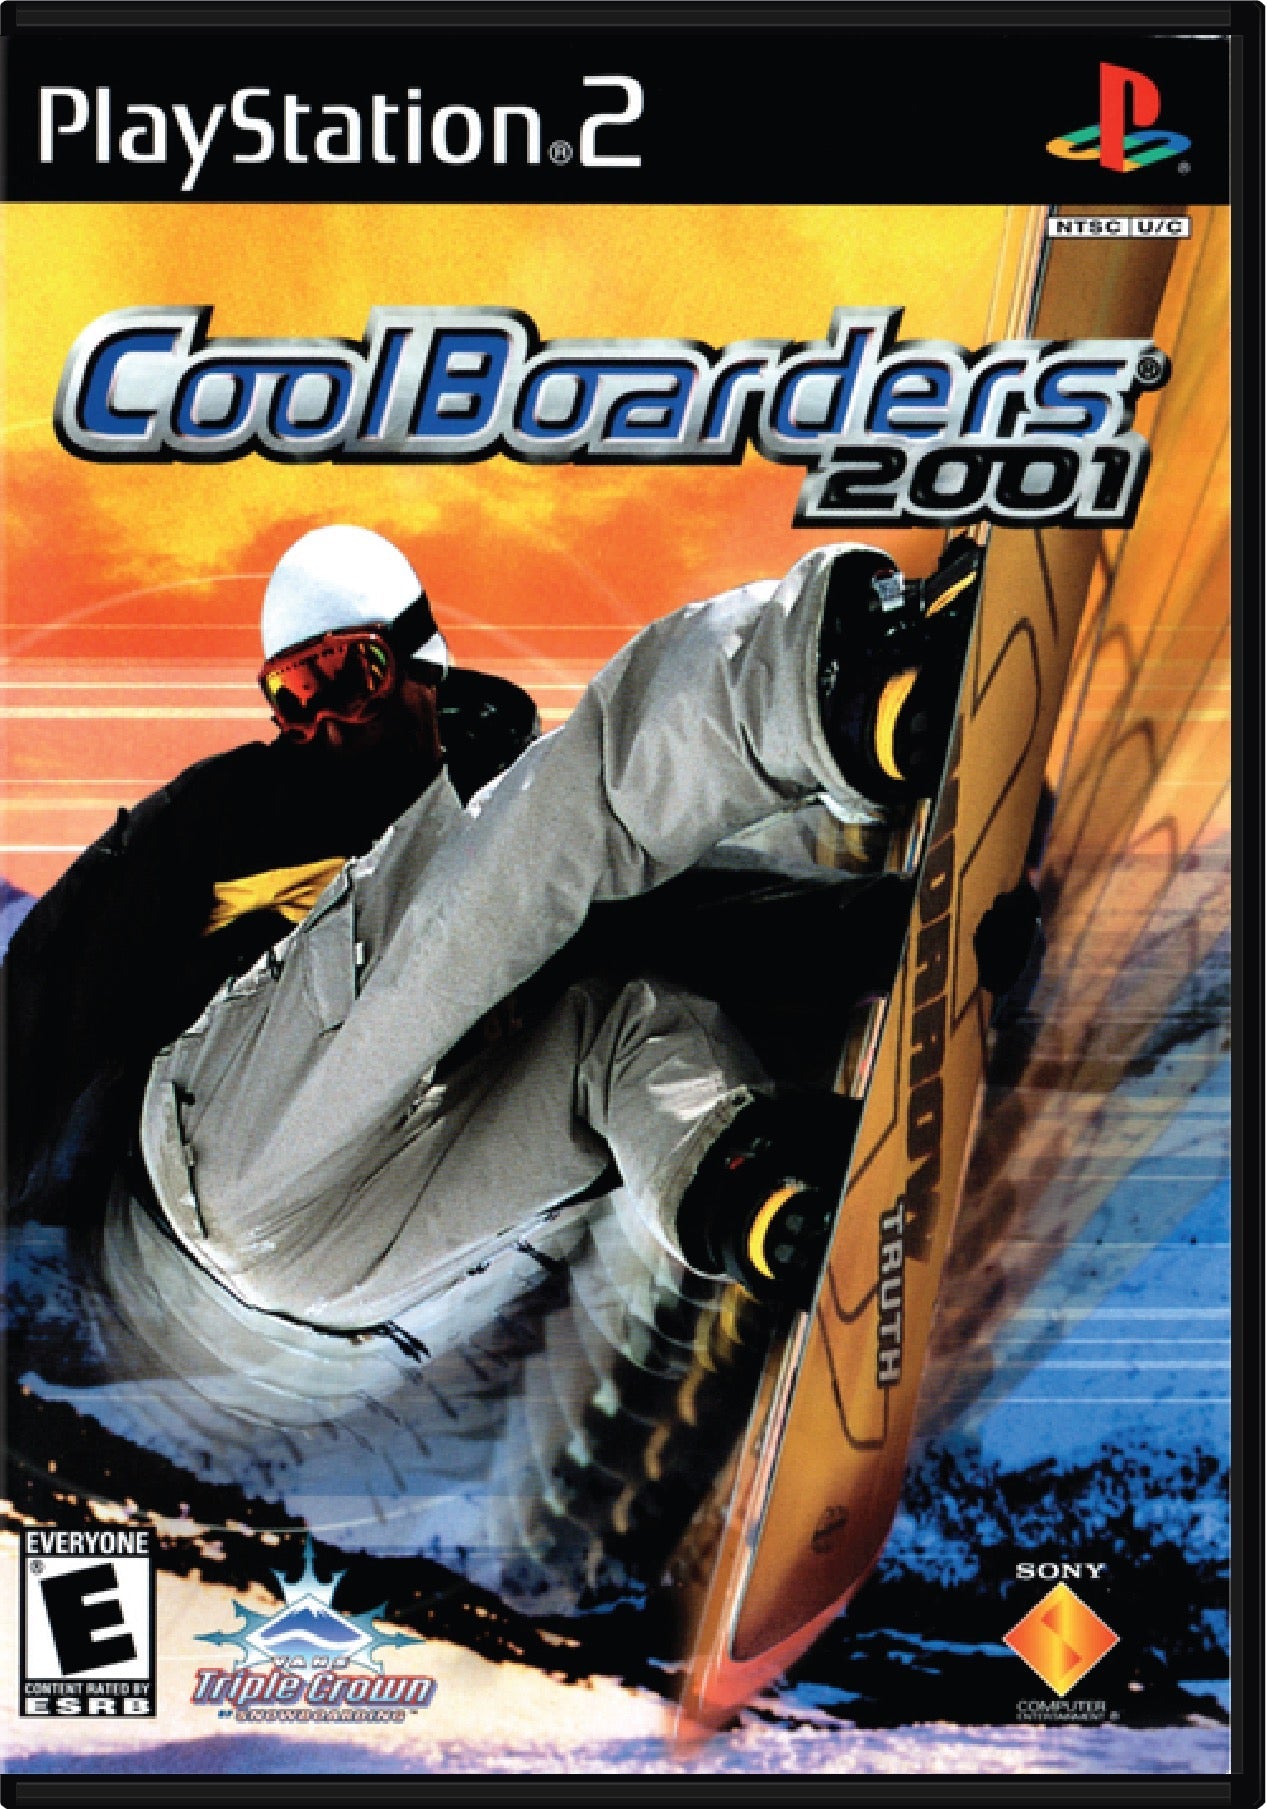 Cool Boarders 2001 Cover Art and Product Photo